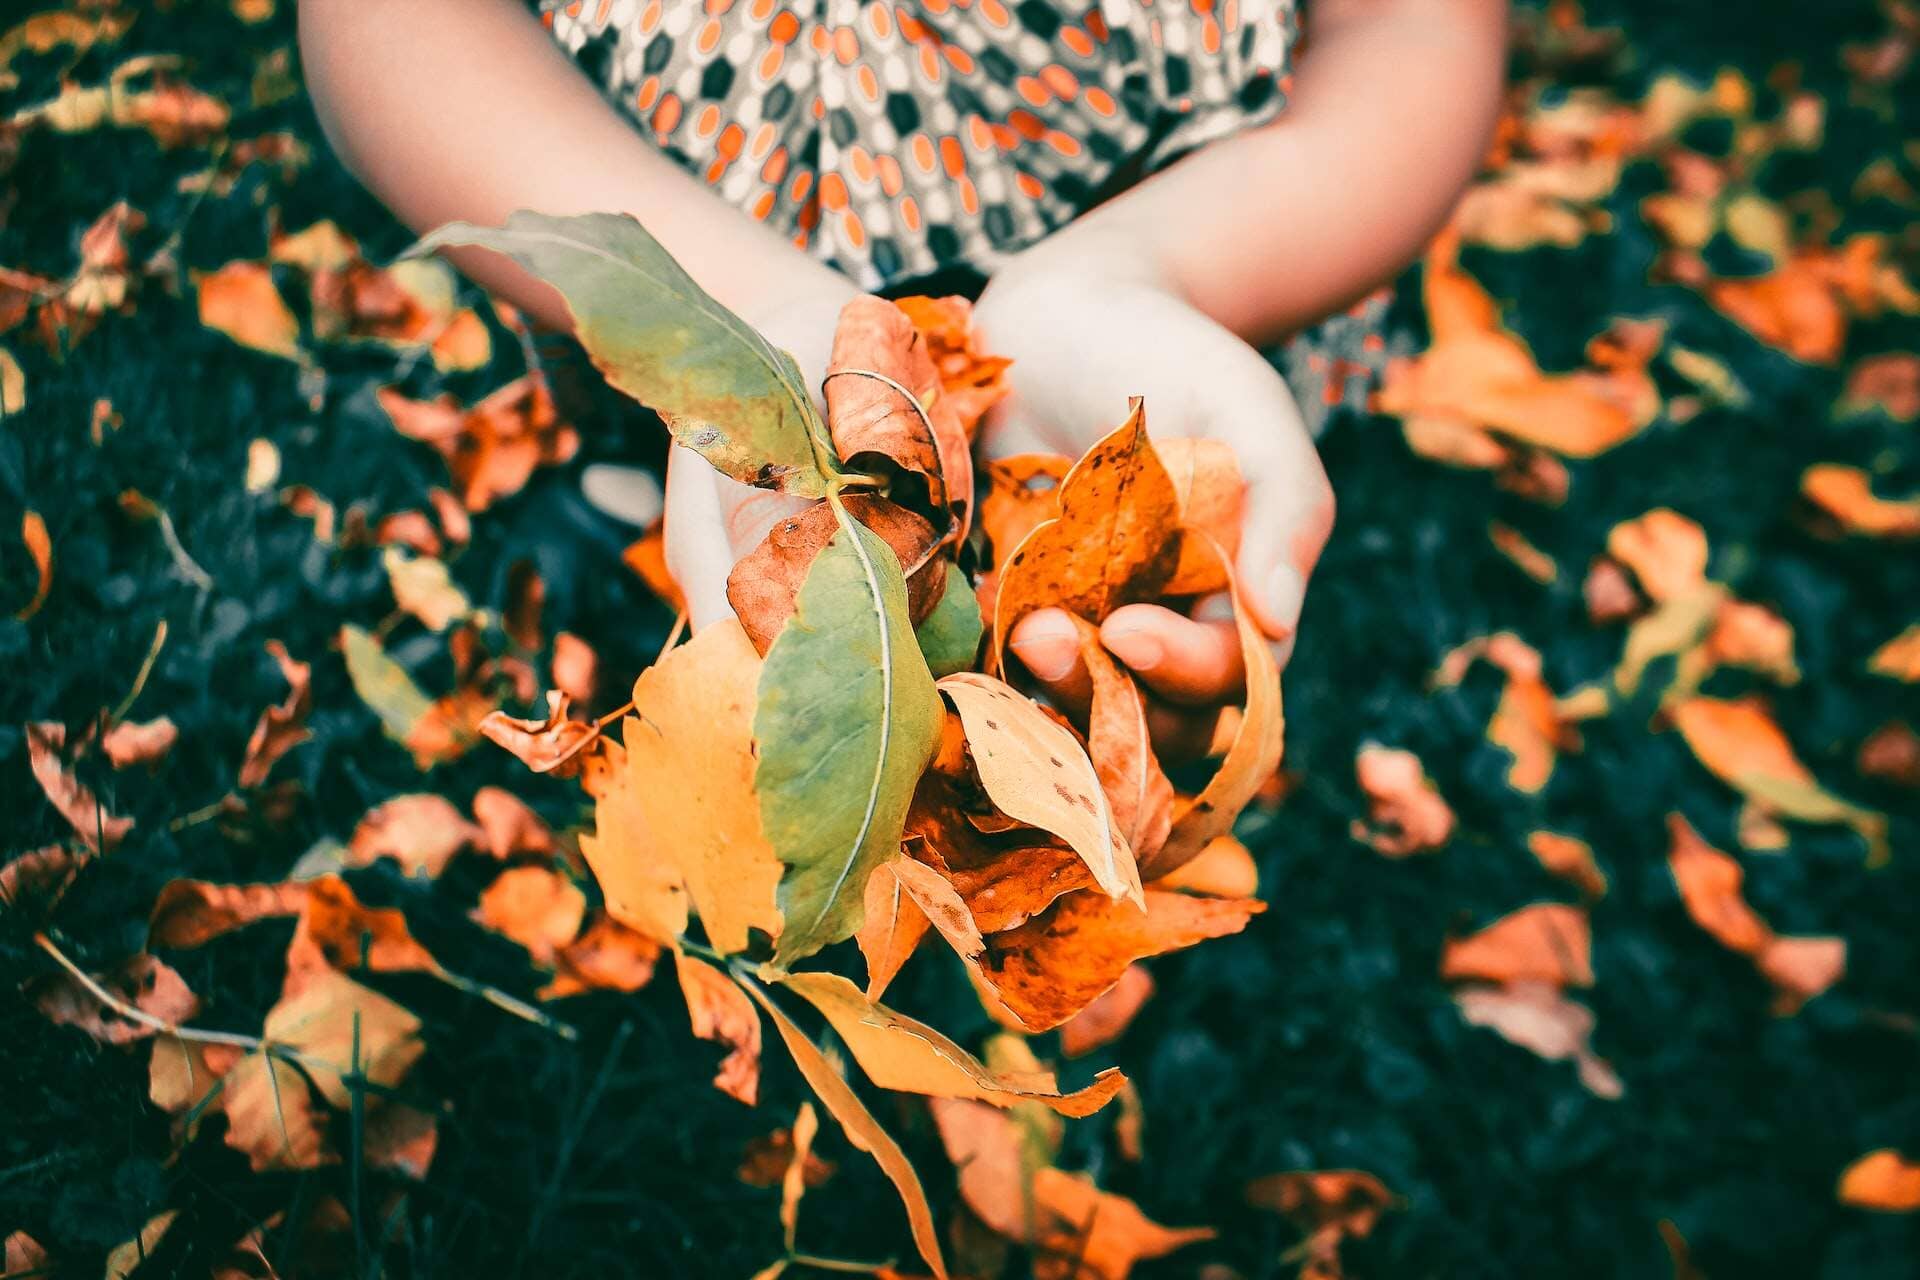 7 Autumn Gardening Tips to Help your Garden Thrive and Prepare it for Winter